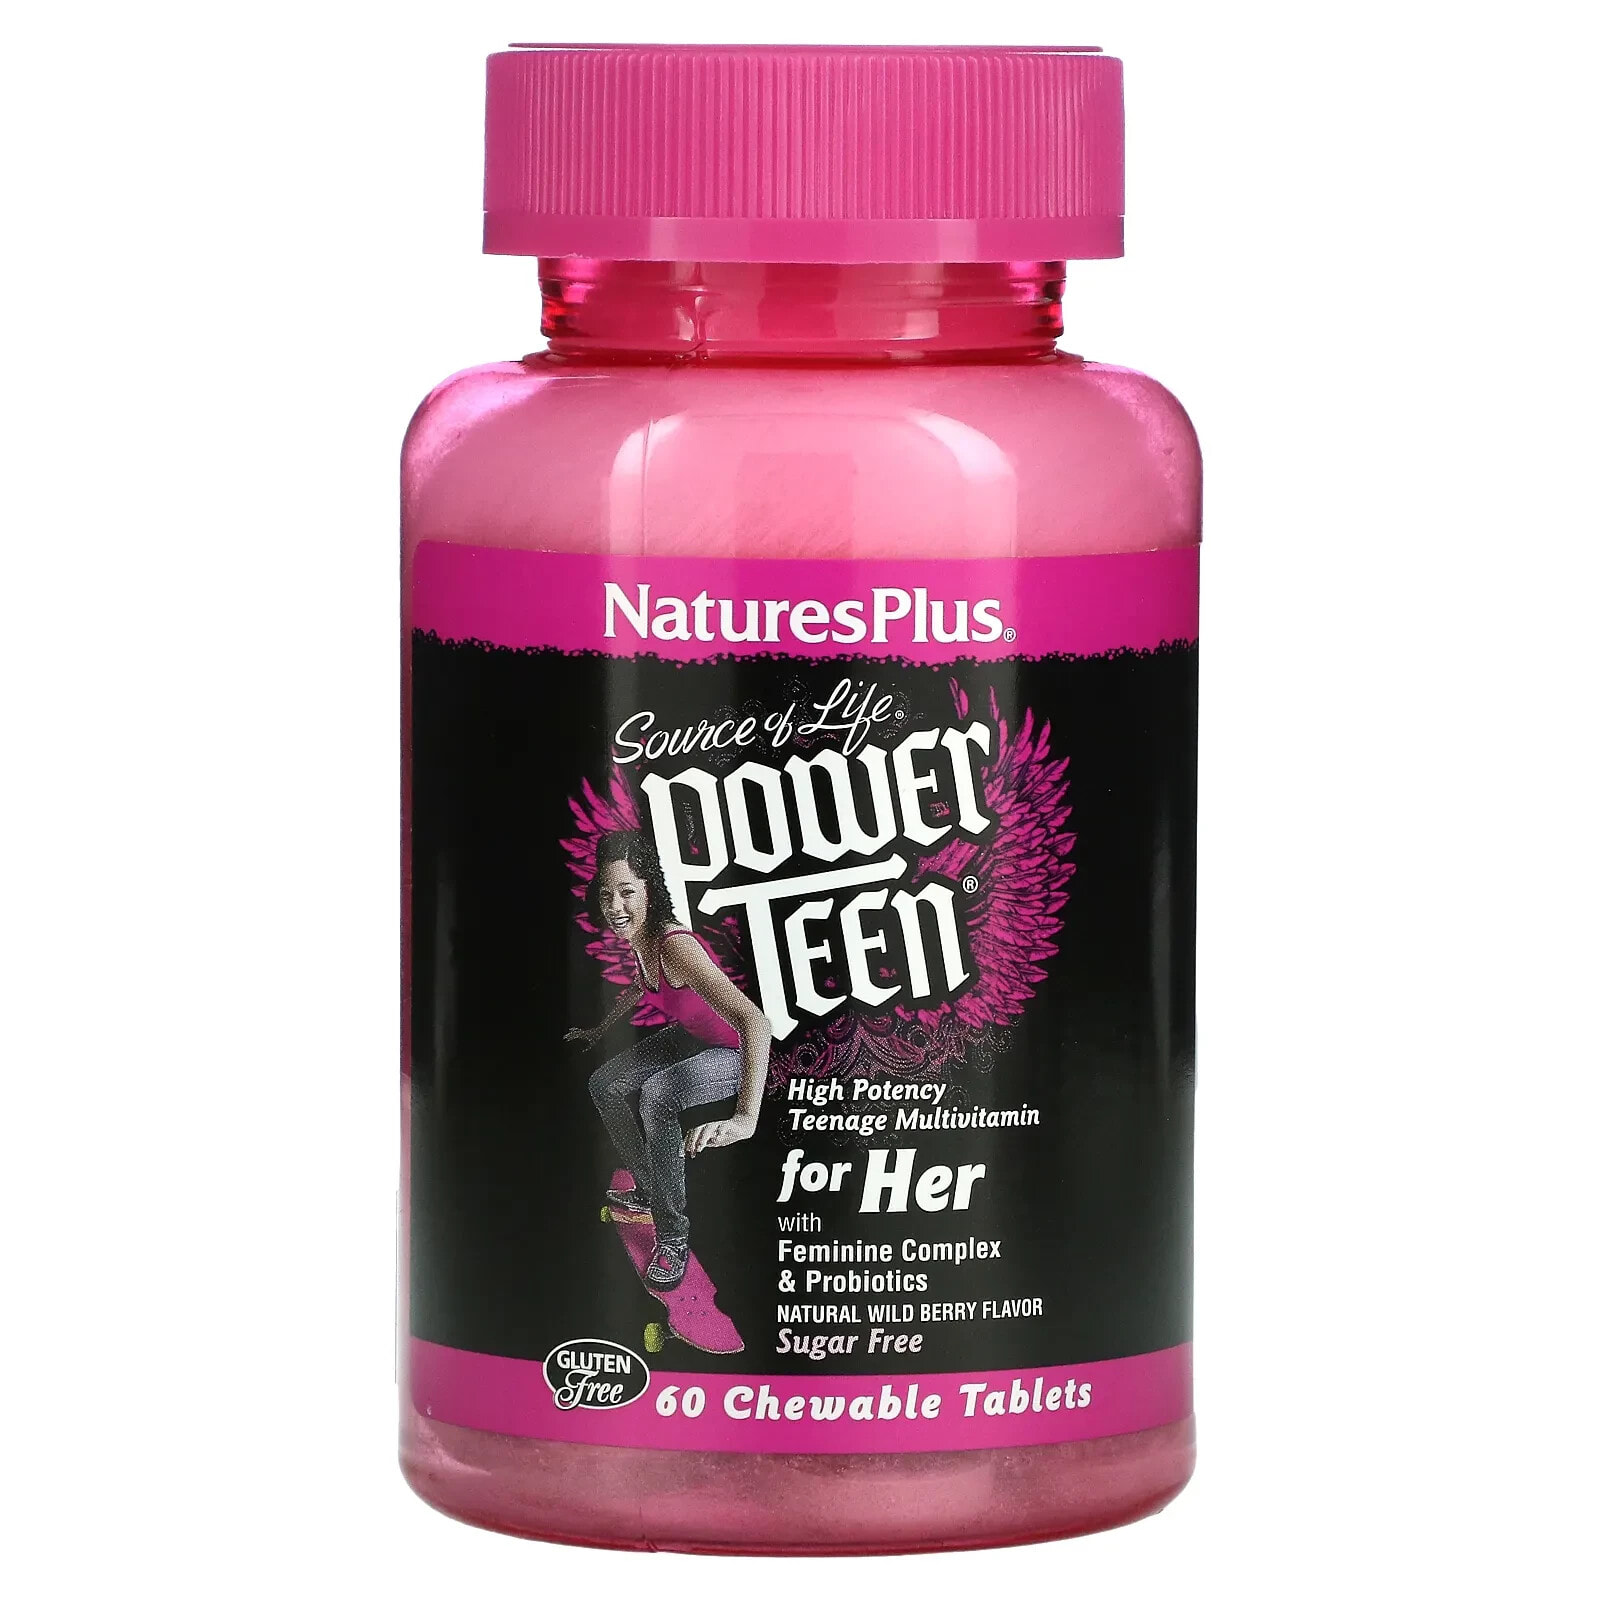 Source of Life, Power Teen, For Her, Sugar Free, Natural Wild Berry , 60 Chewable Tablets